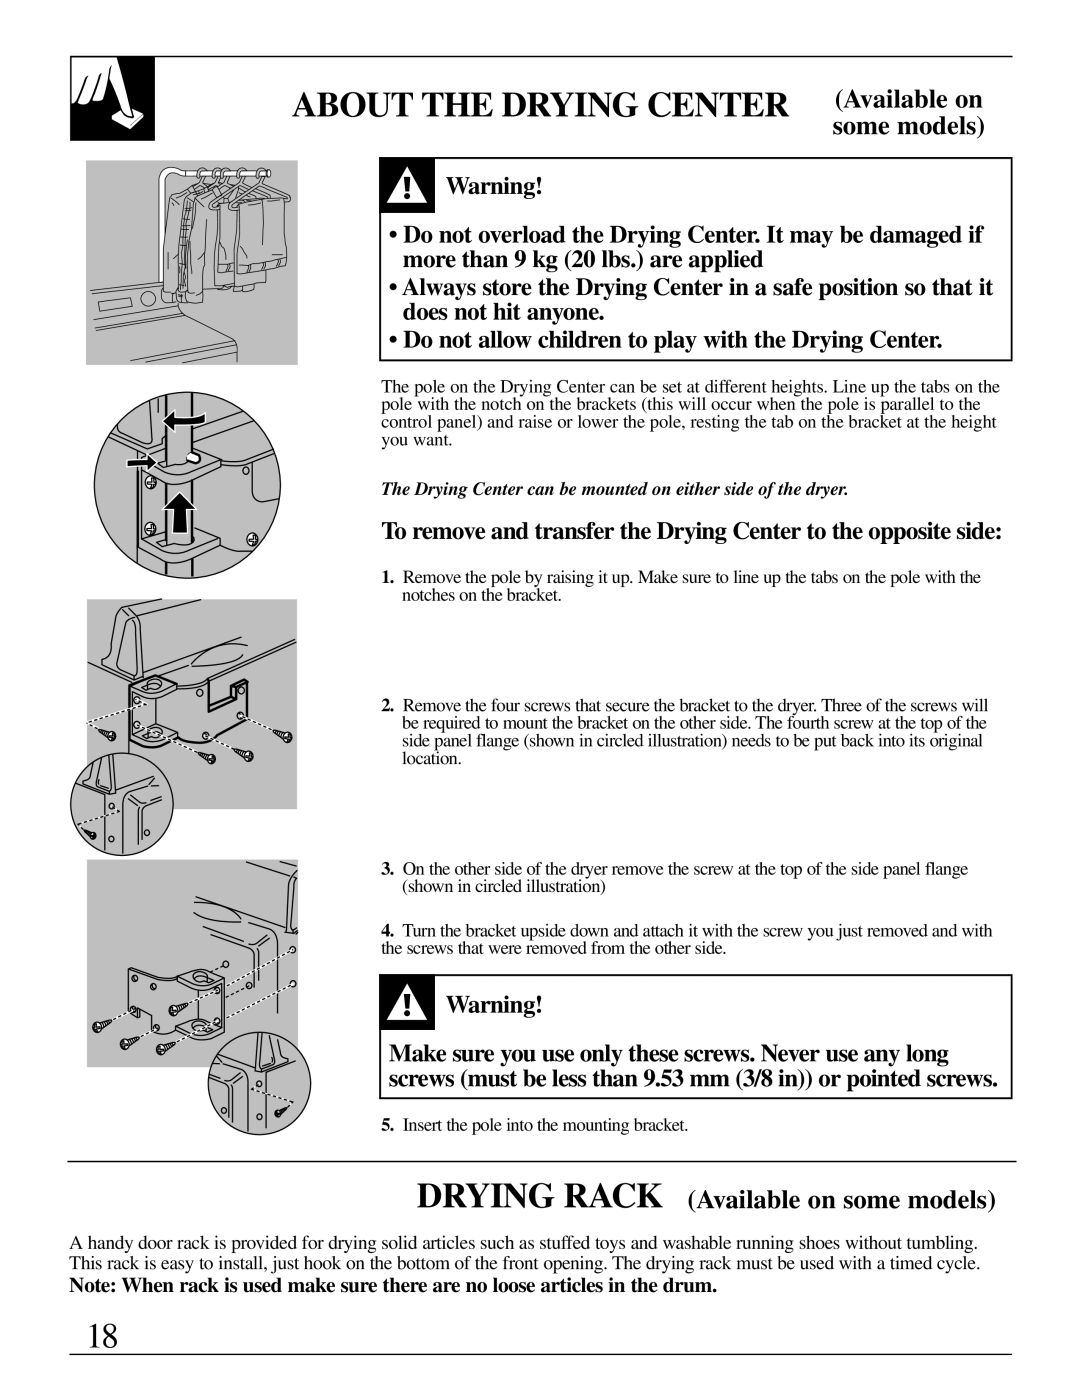 GE 500A280P013 operating instructions About The Drying Center, DRYING RACK Available on some models 